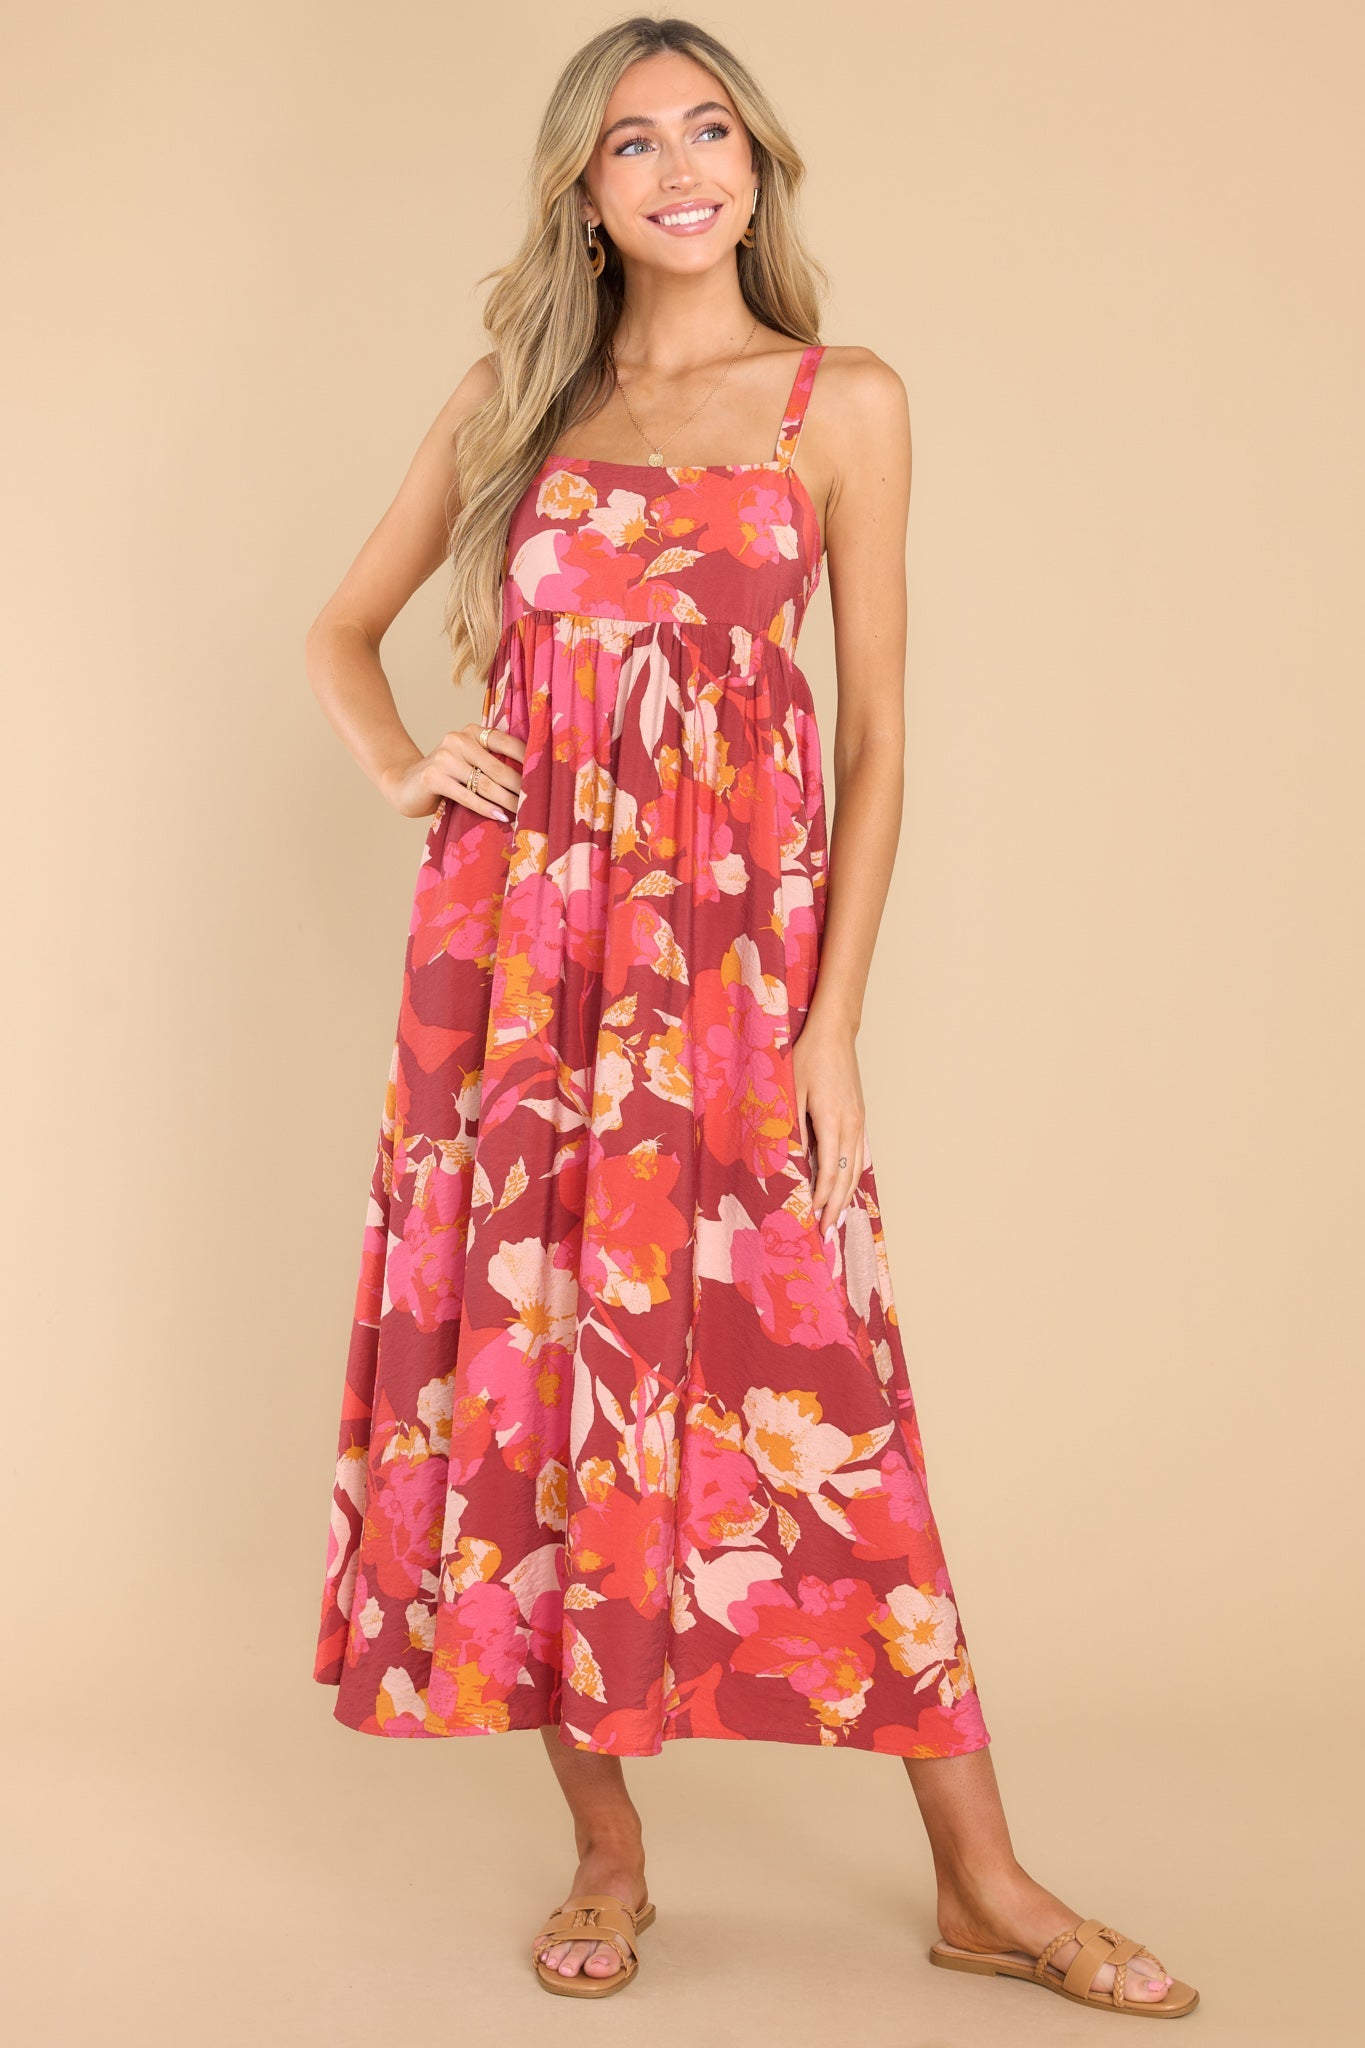 Dramatically Cute Red Floral Print Maxi Dress - Red Dress